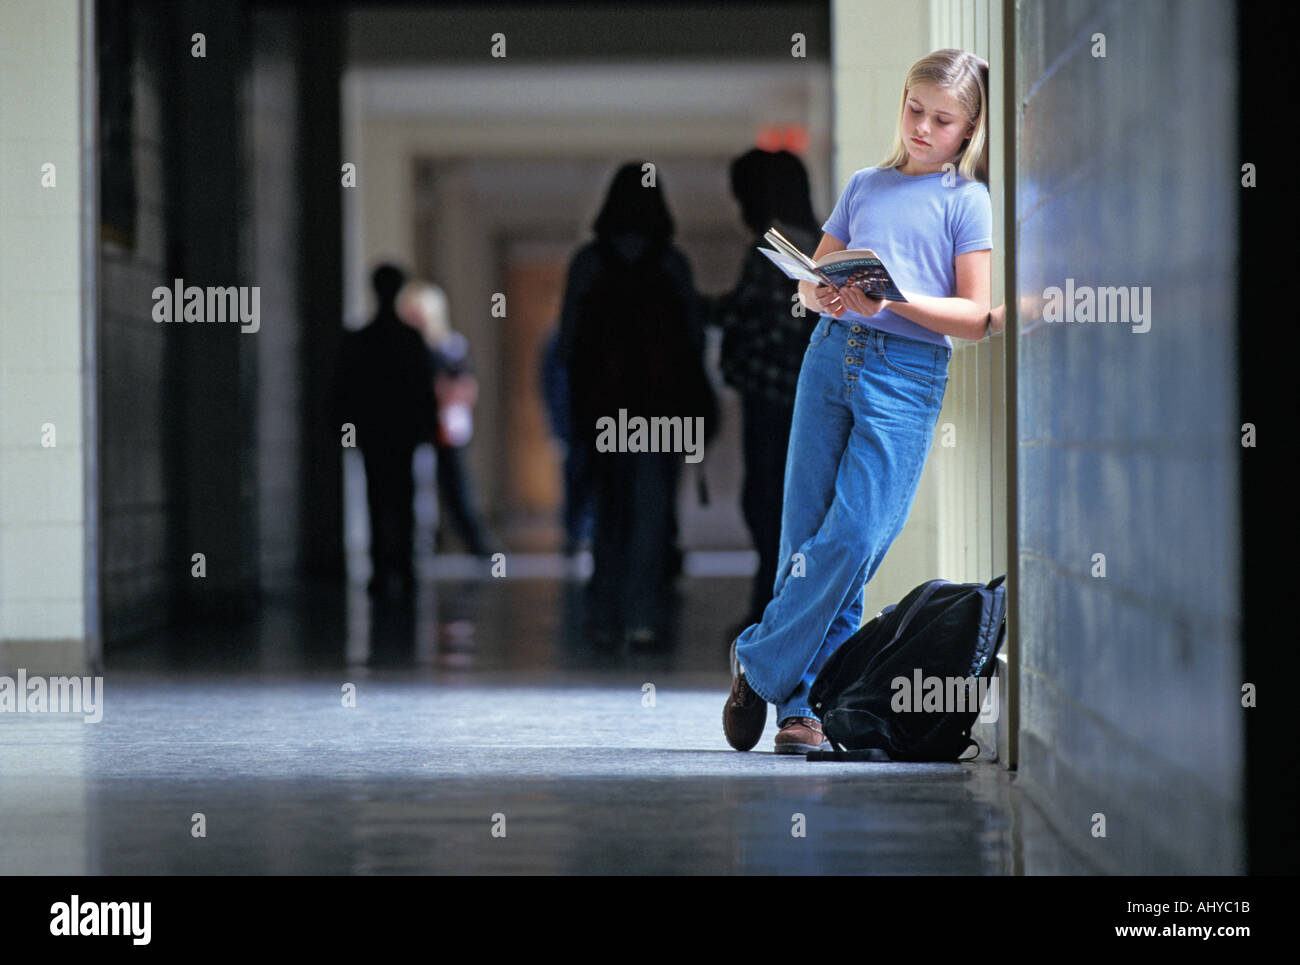 Caucasian female student reading book in middle school hallway Stock Photo